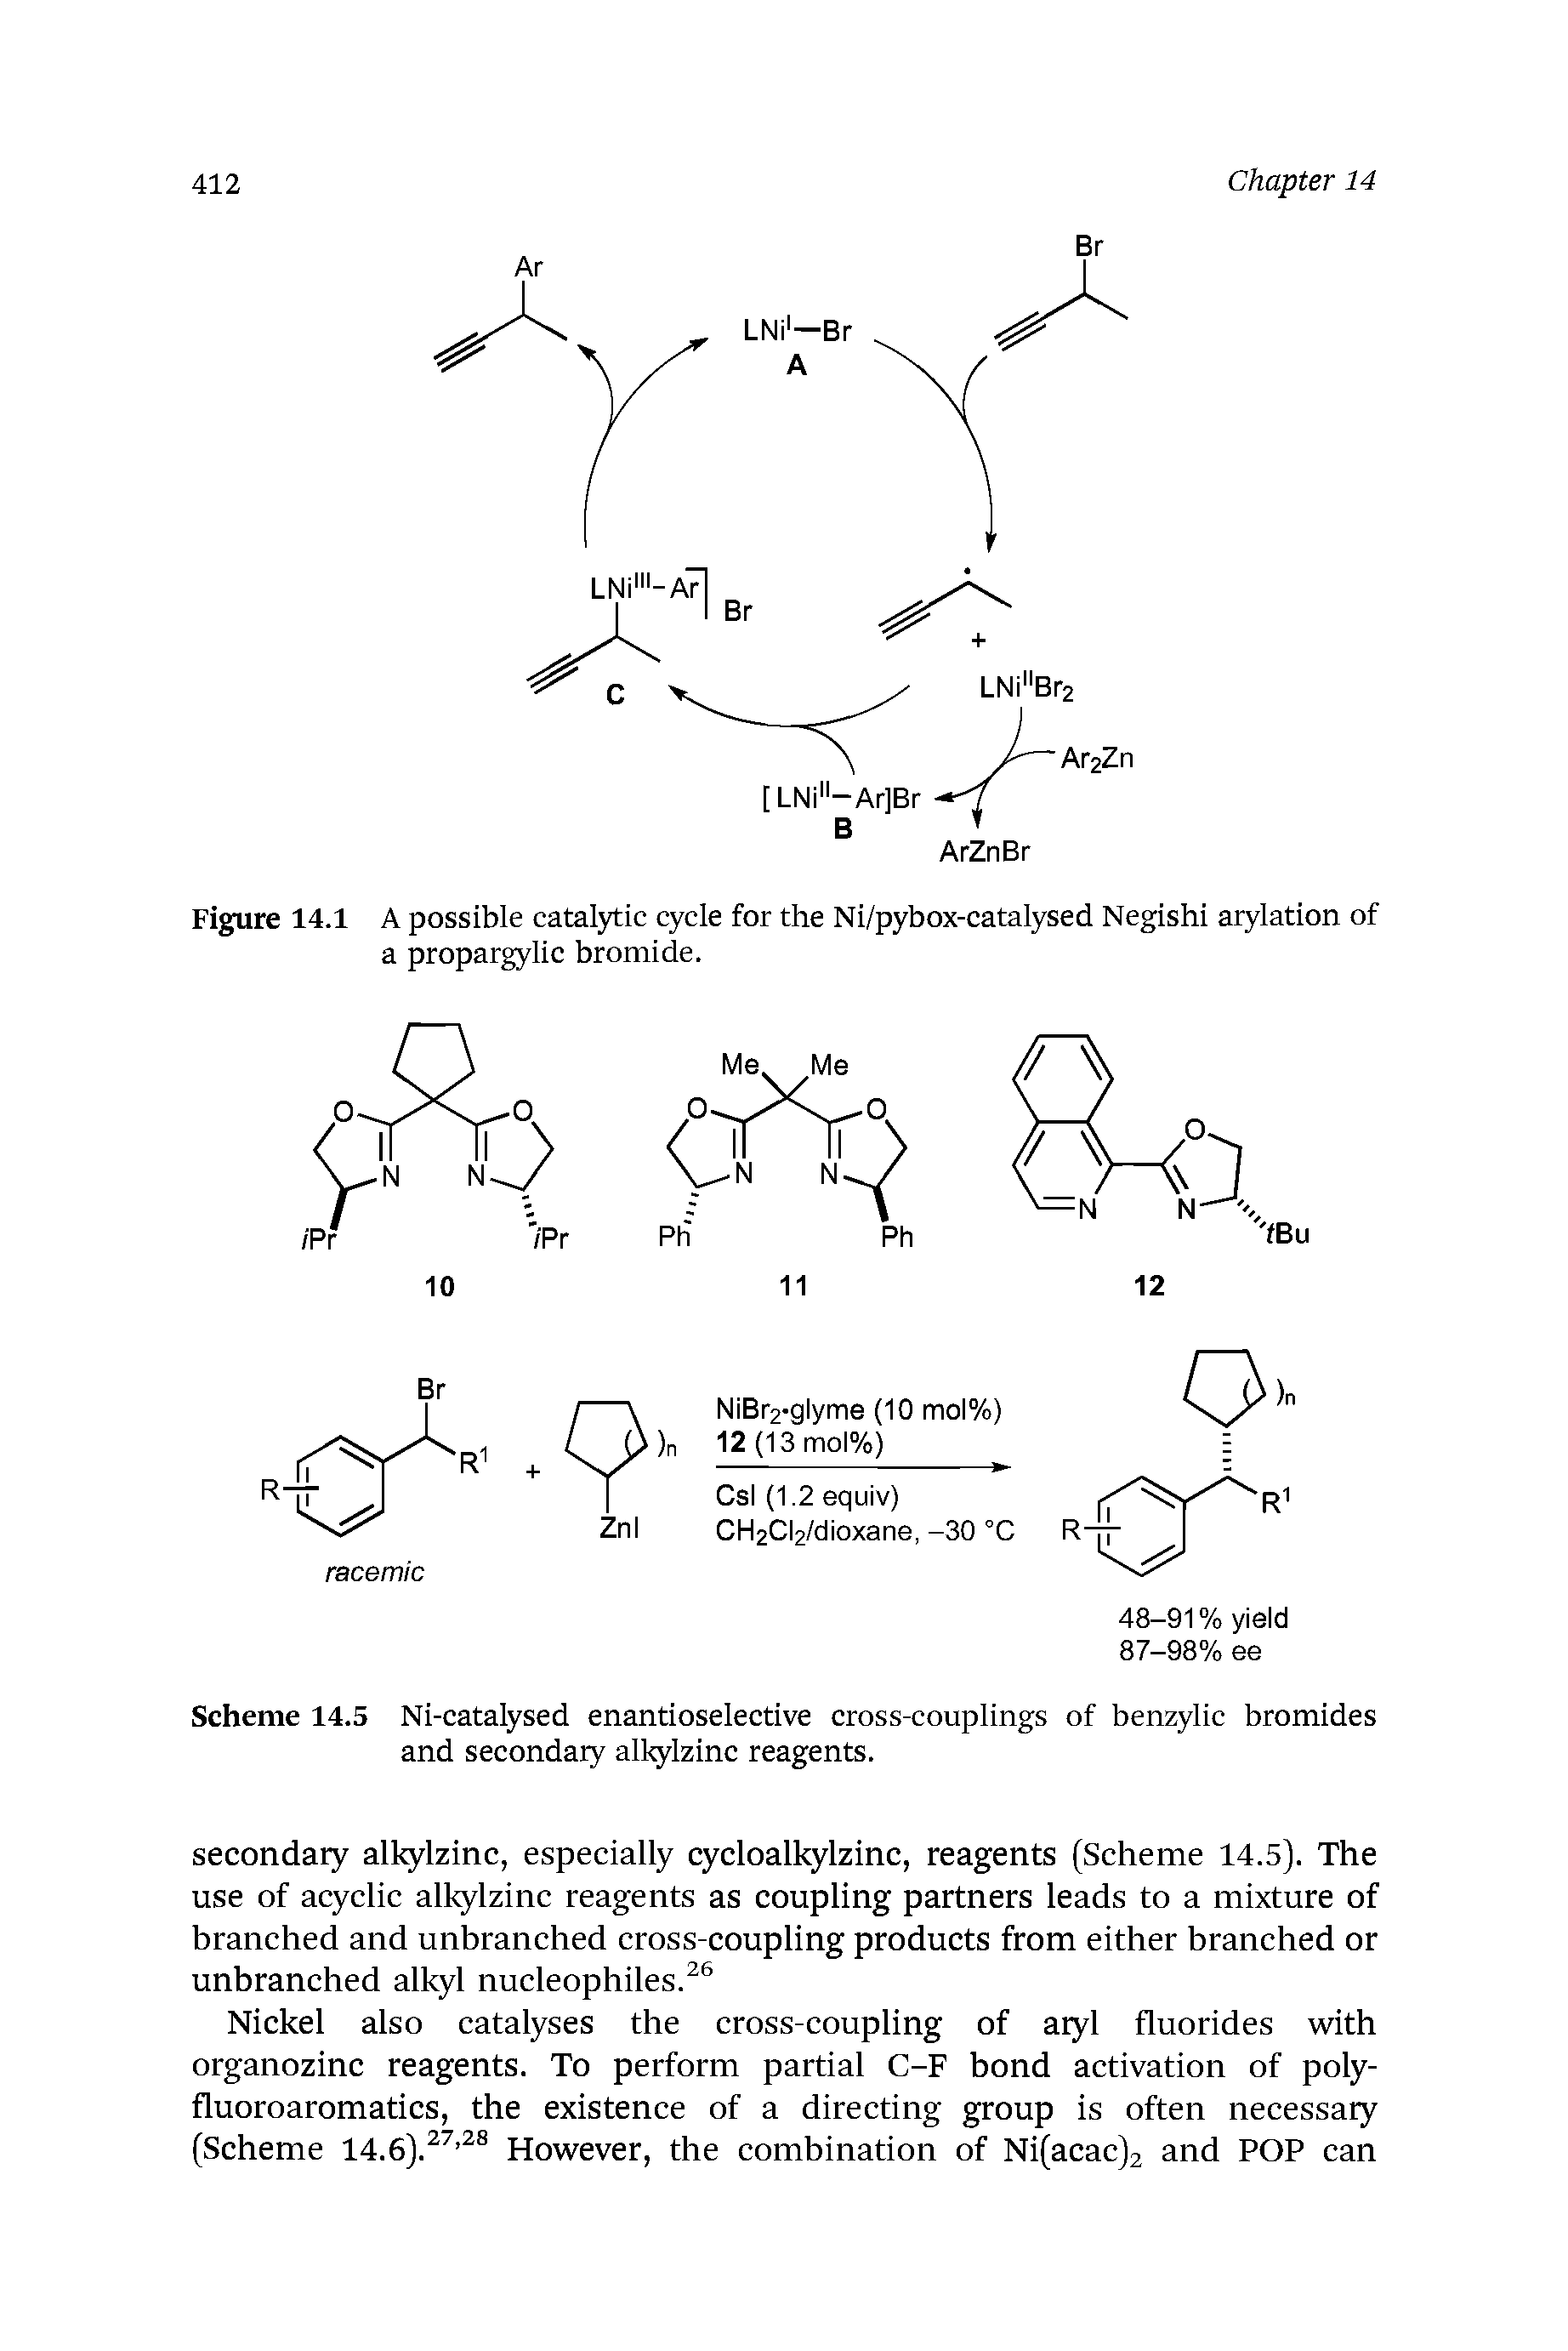 Scheme 14.5 Ni-catalysed enantioselective cross-couplings of benzylic bromides and secondary alkylzinc reagents.